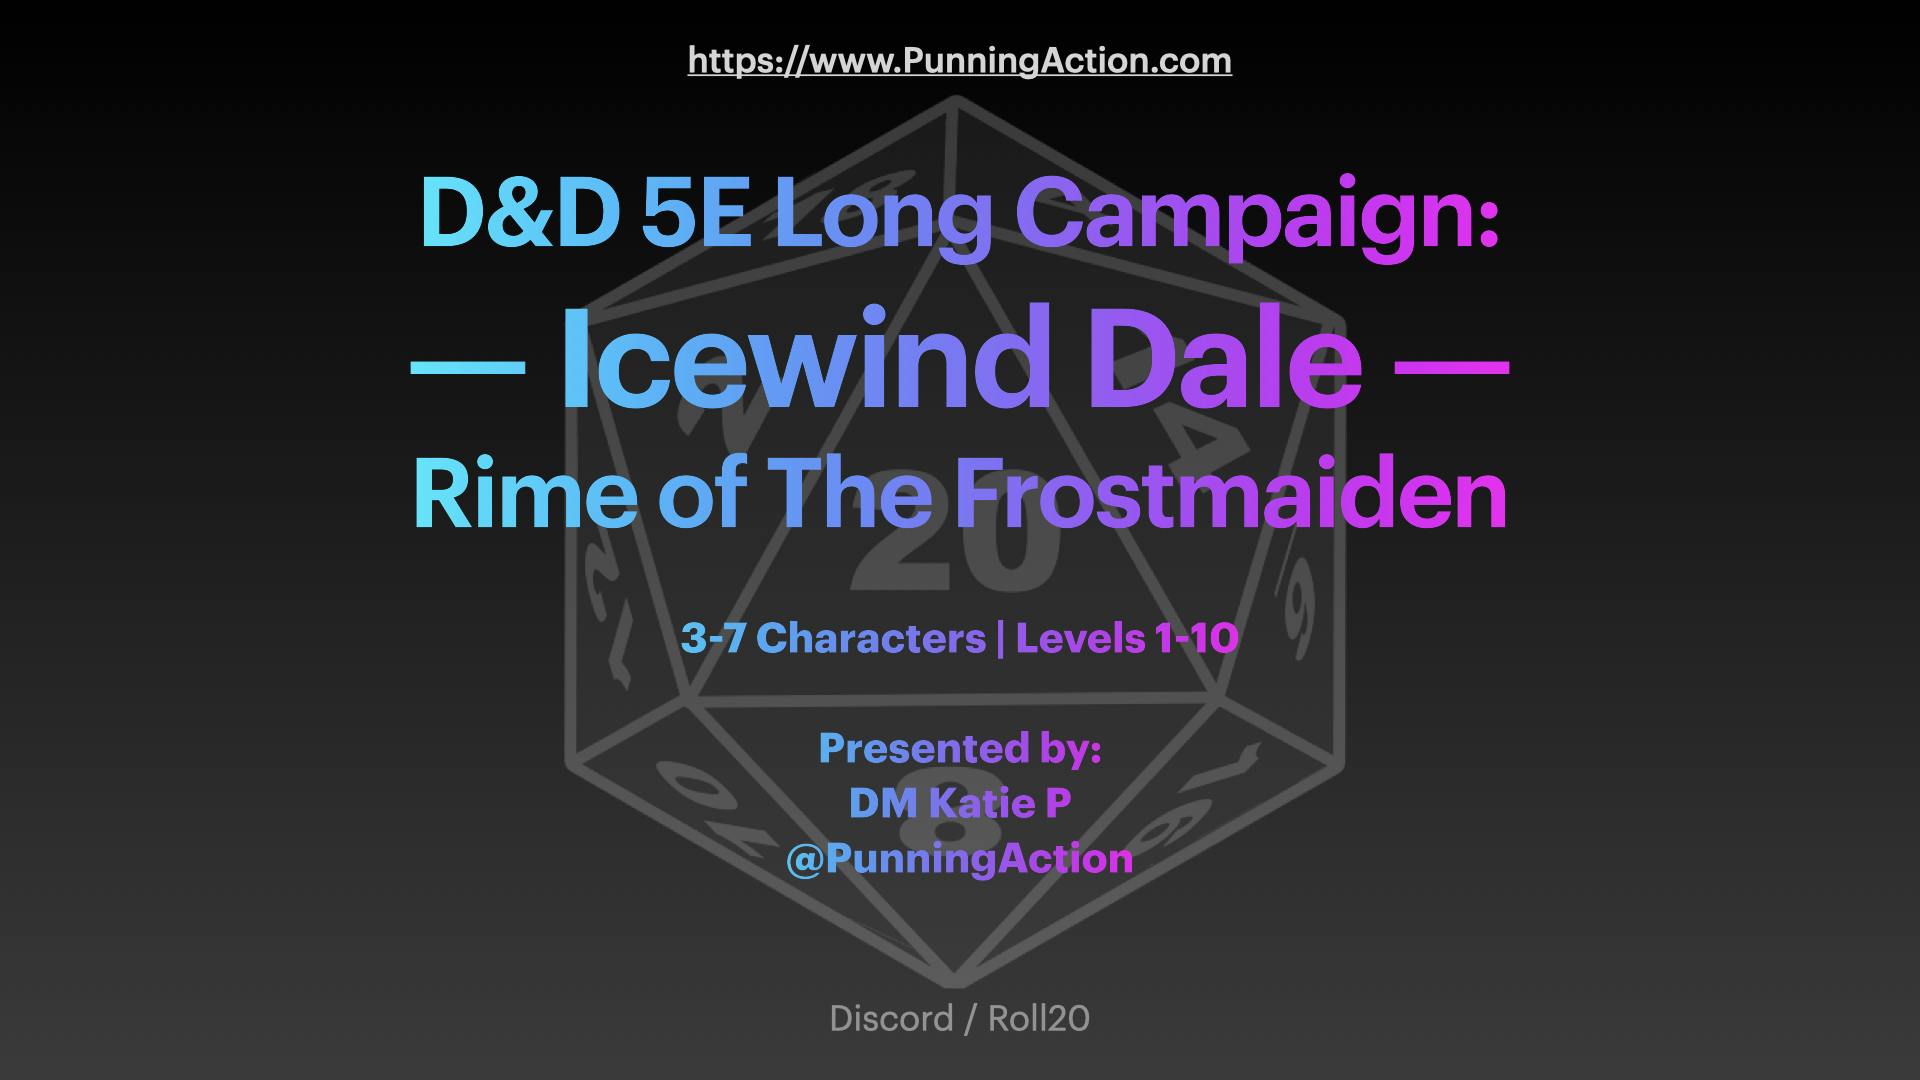 Icewind Dale - Rime of the Frostmaiden